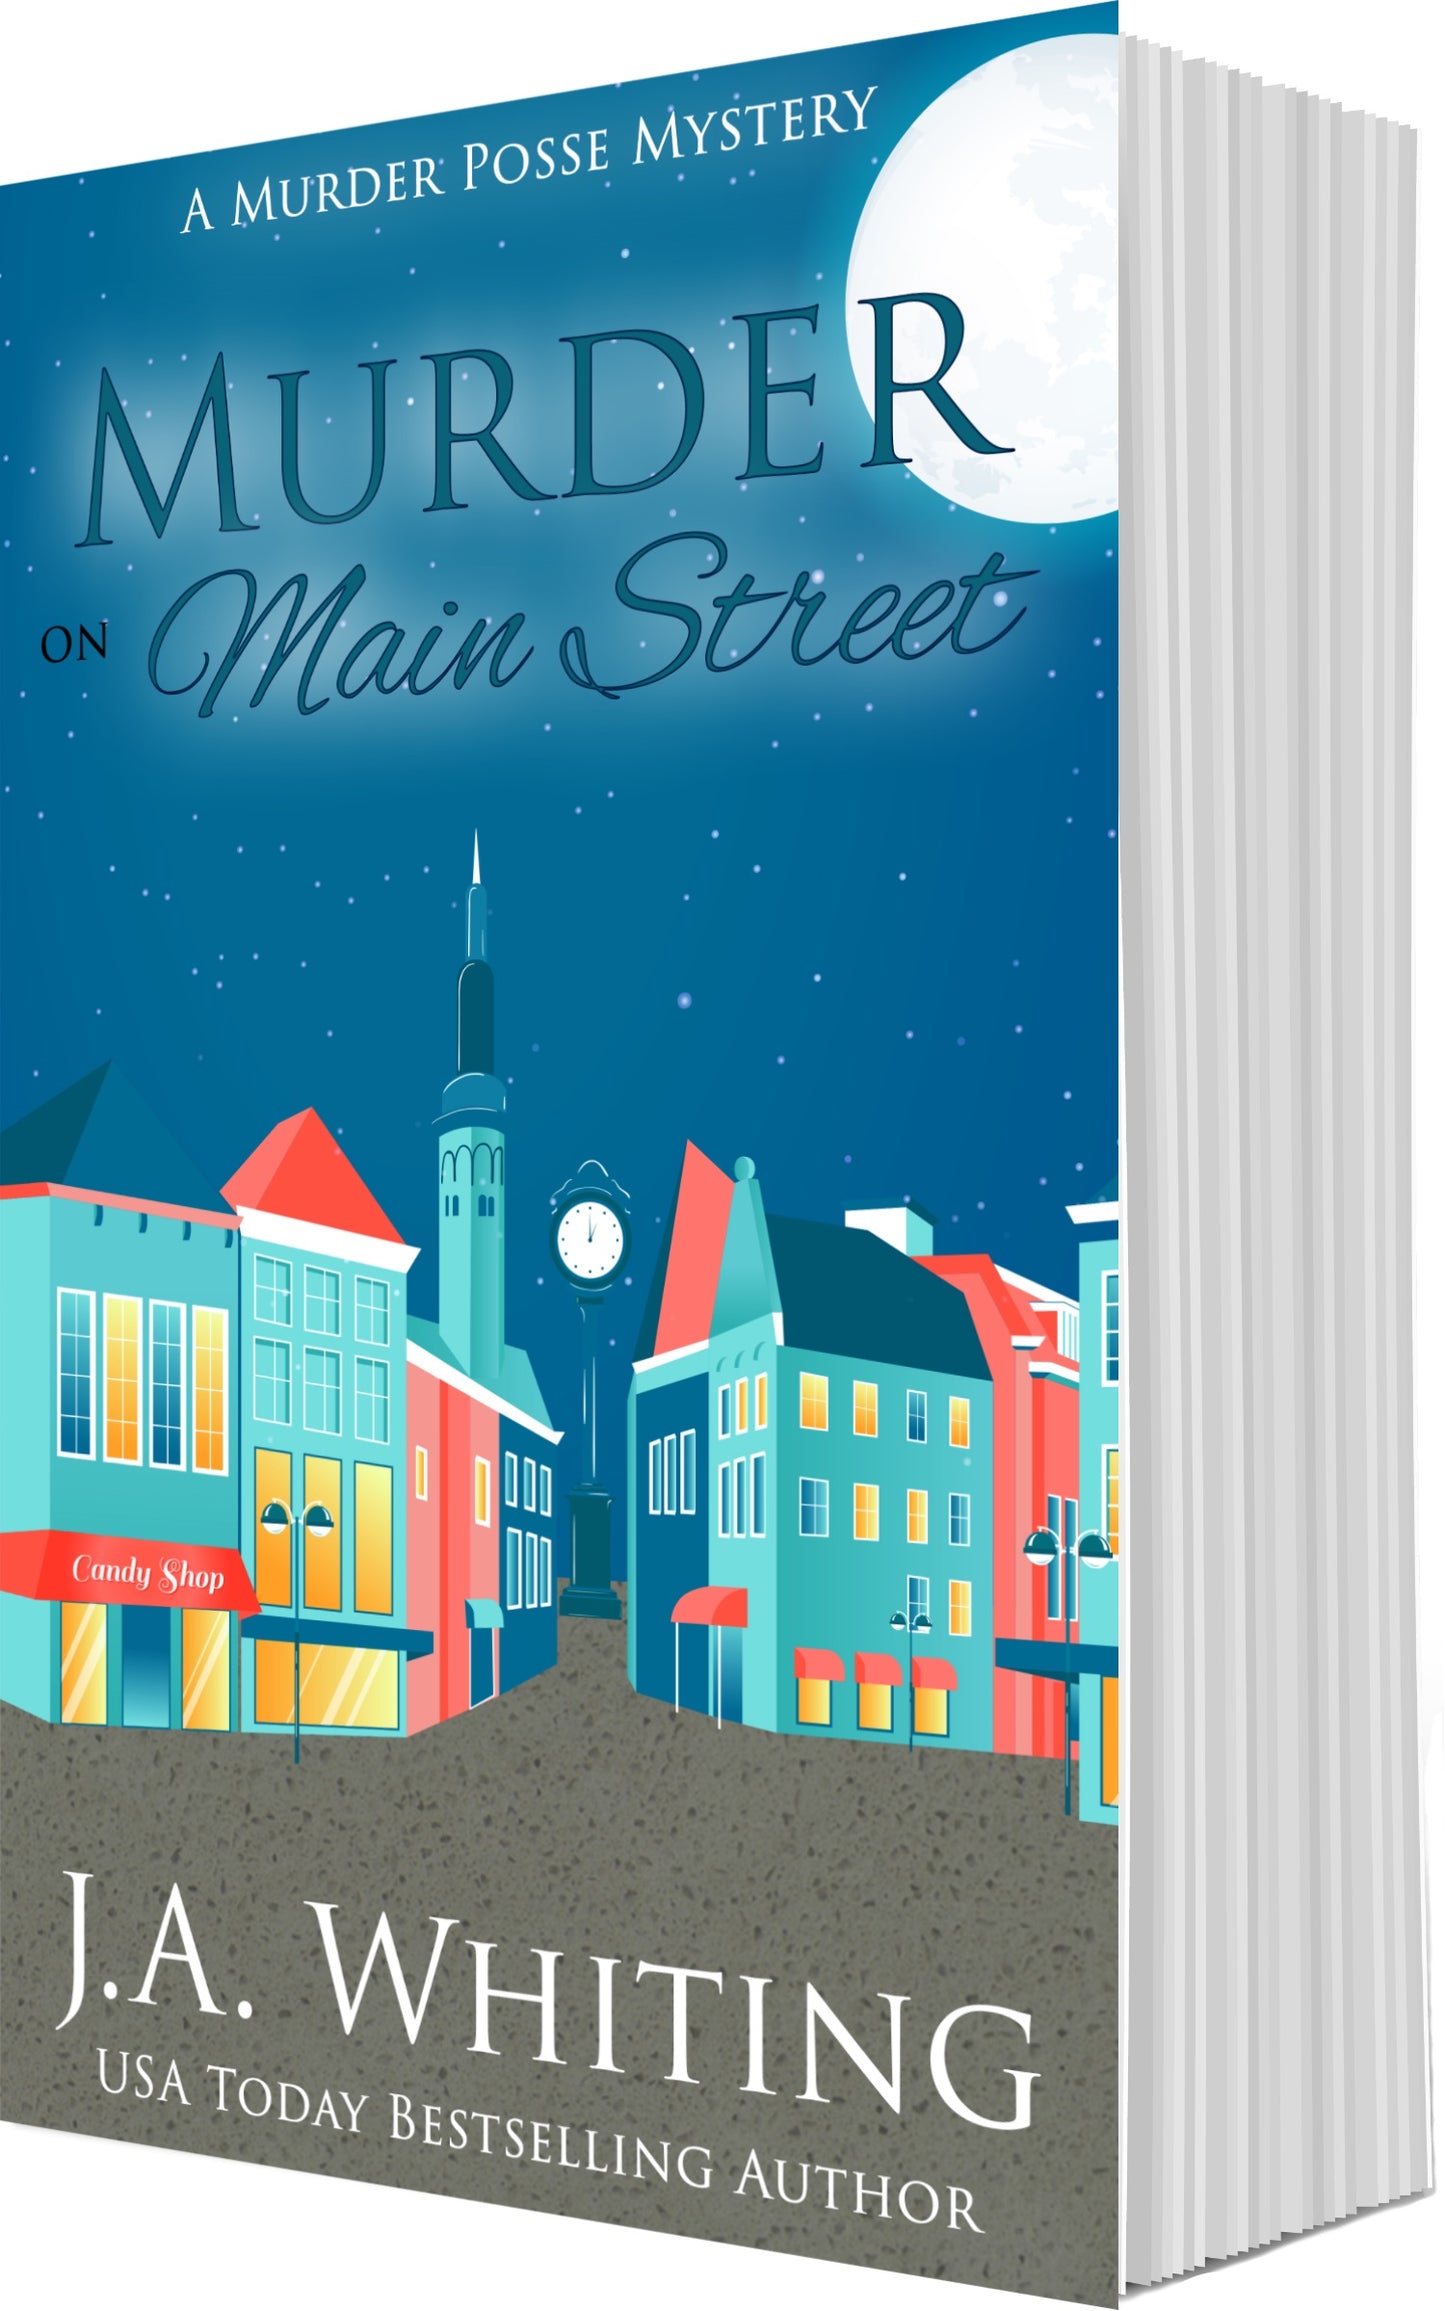 J.A. Whiting Murder on Main Street Paperback